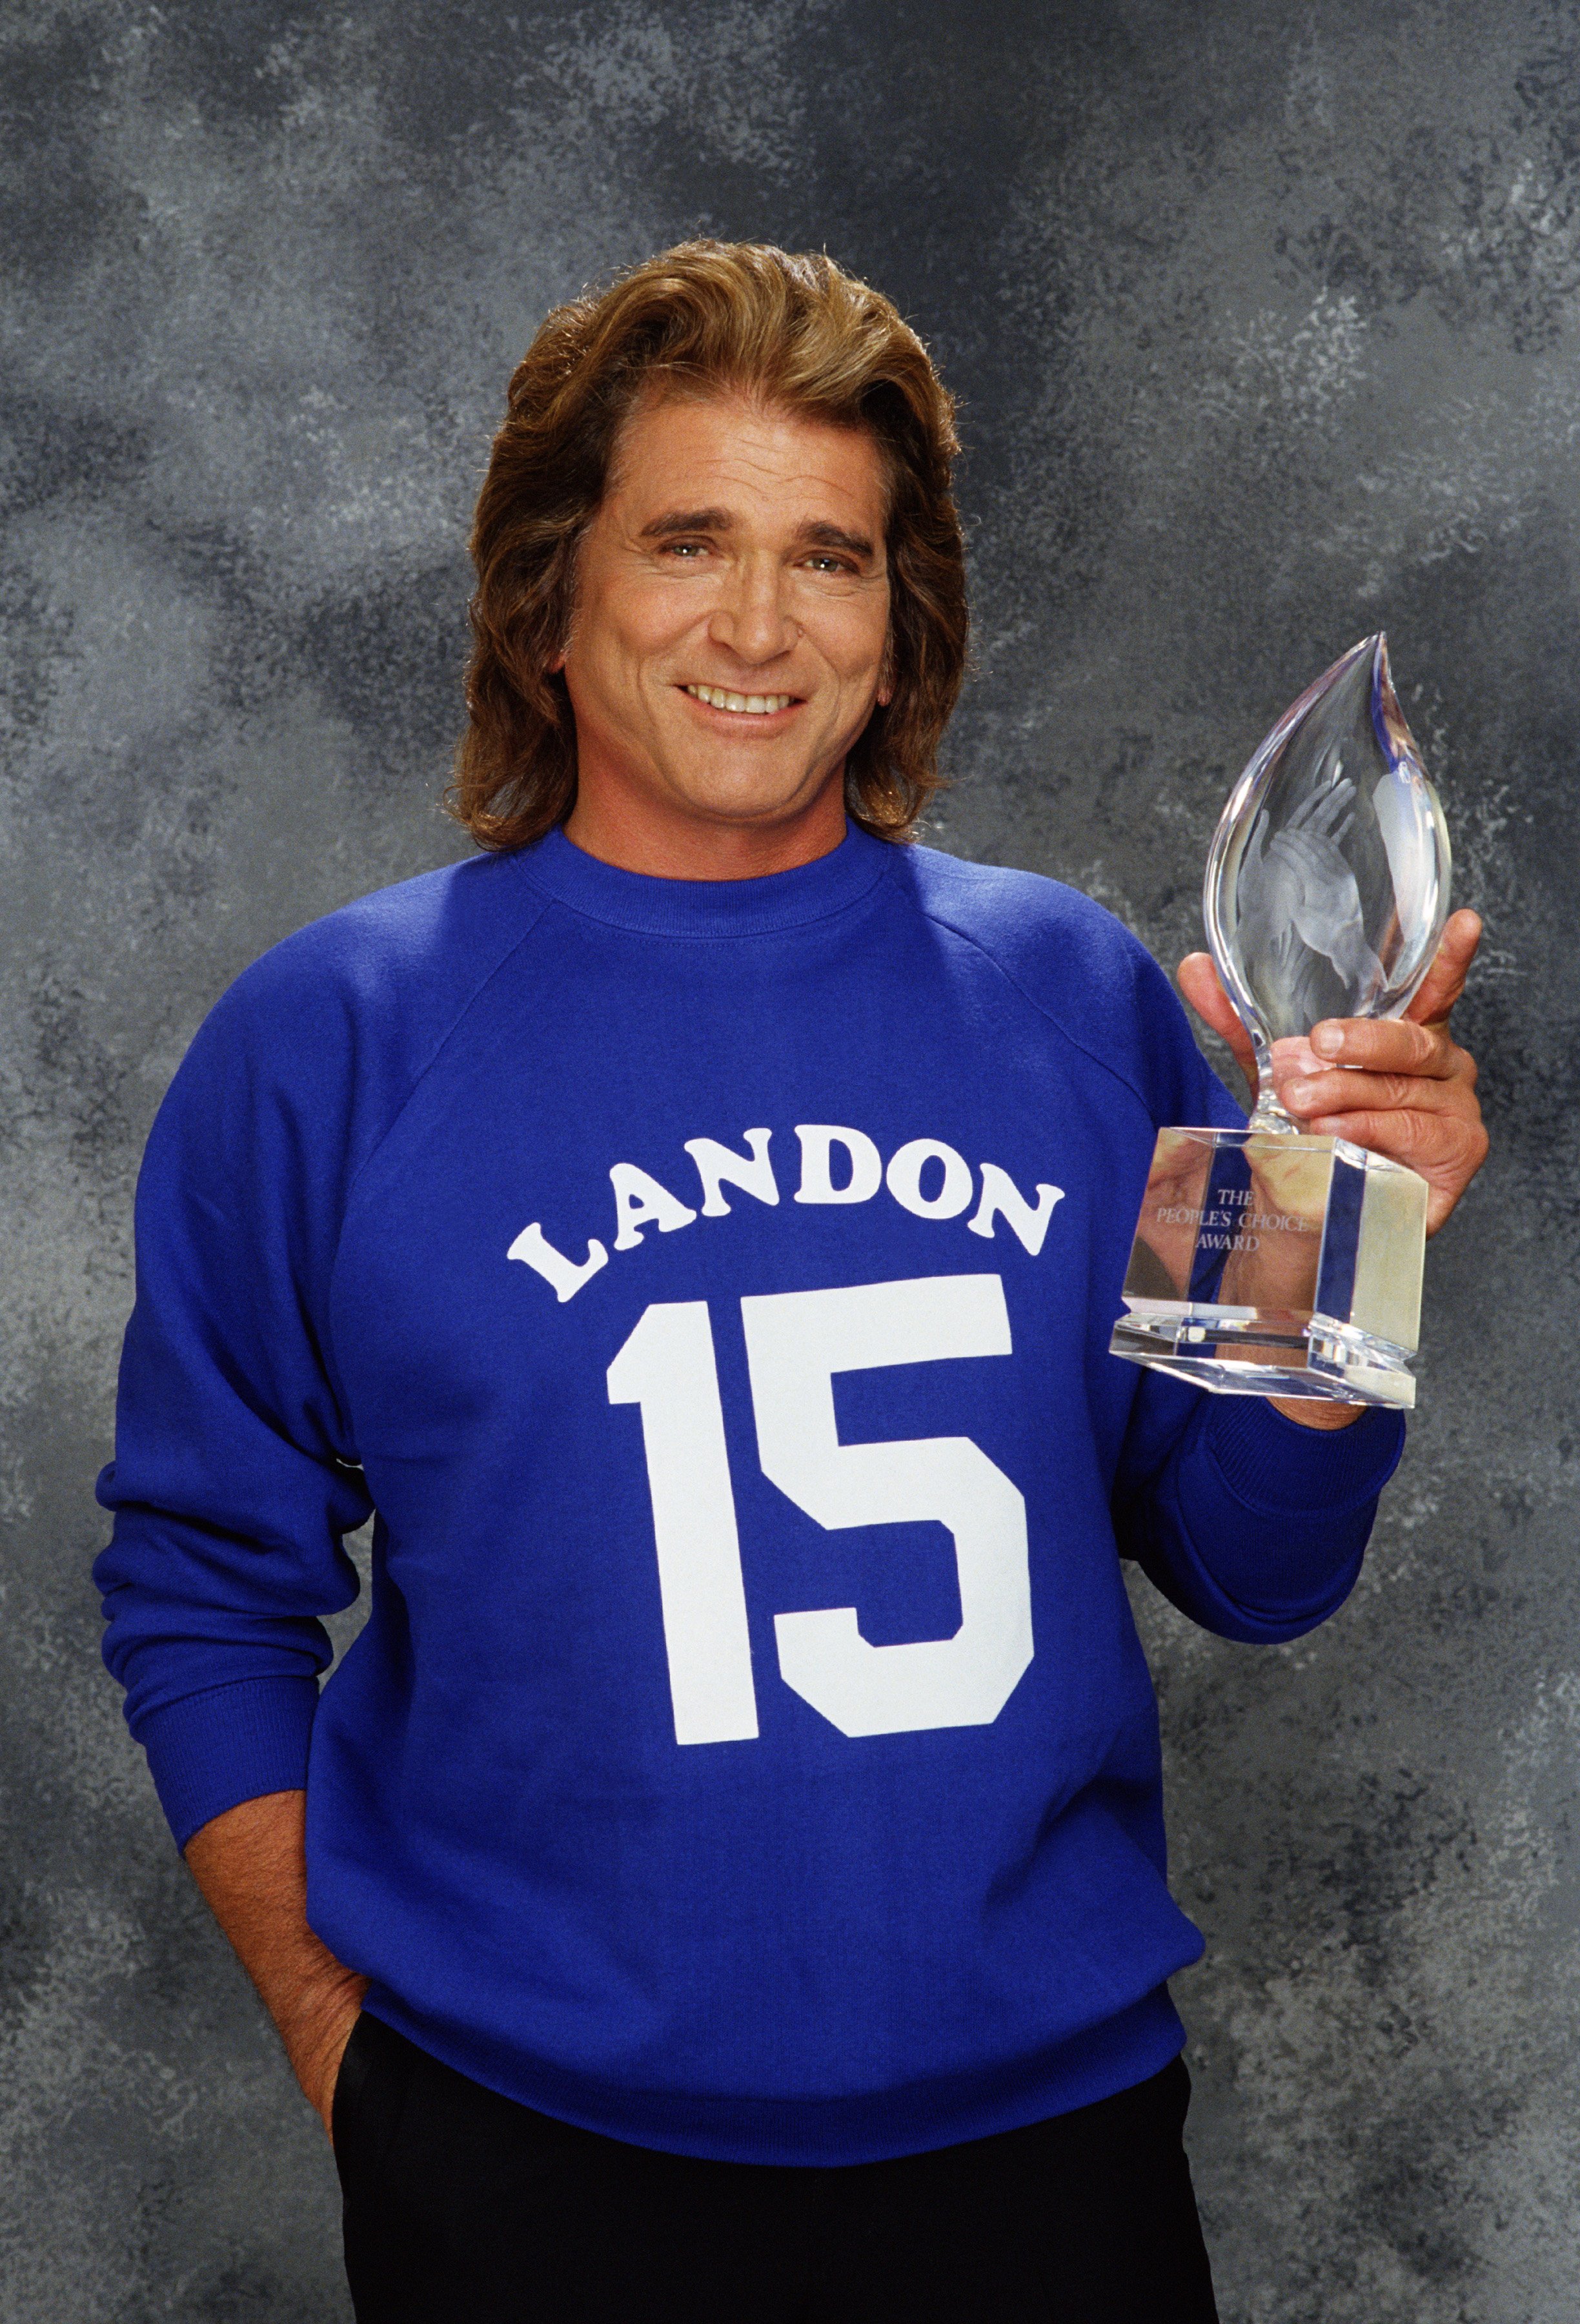 Michael Landon poses with the People's Choice Award during a 1989 Beverly Hills, California, photo portrait session | Photo: GettyImages